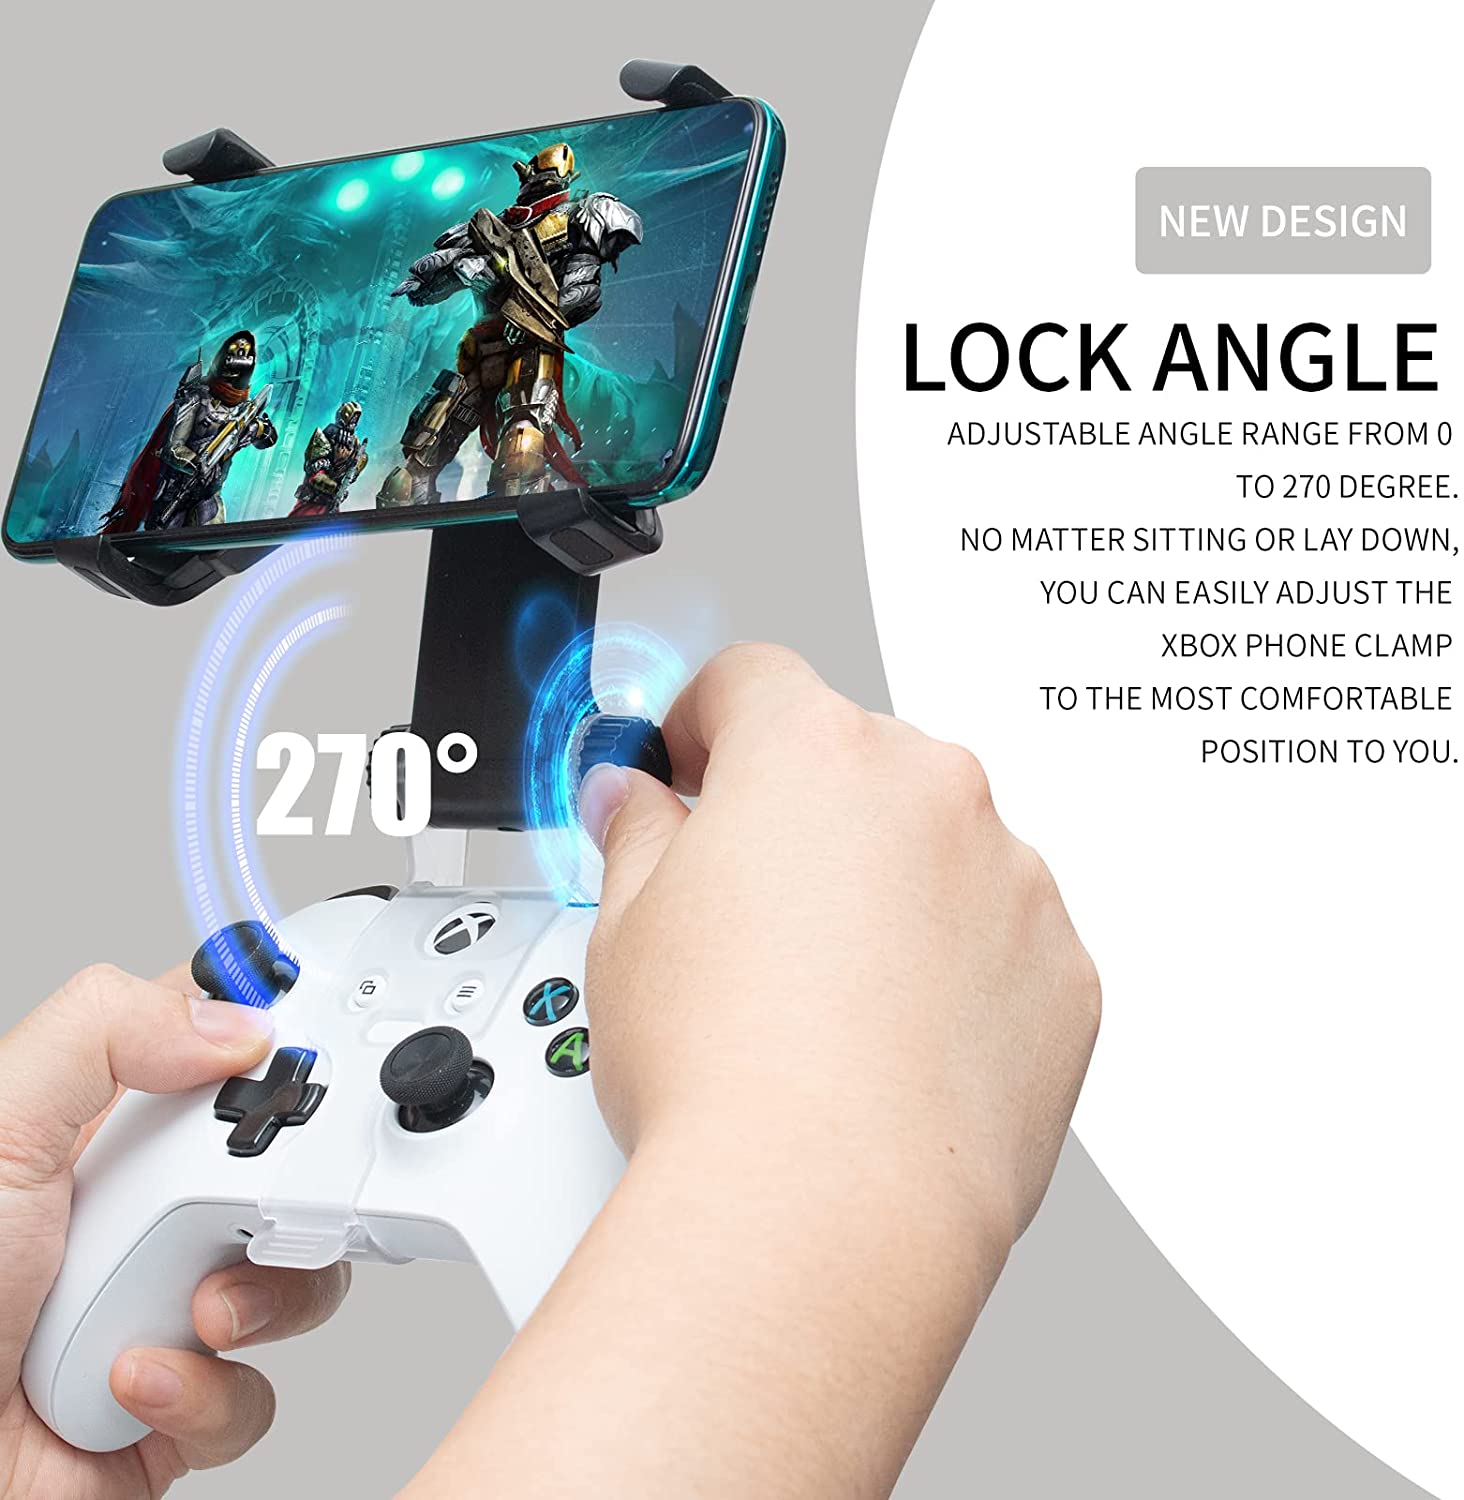 XBOX controller holder to play with your phone